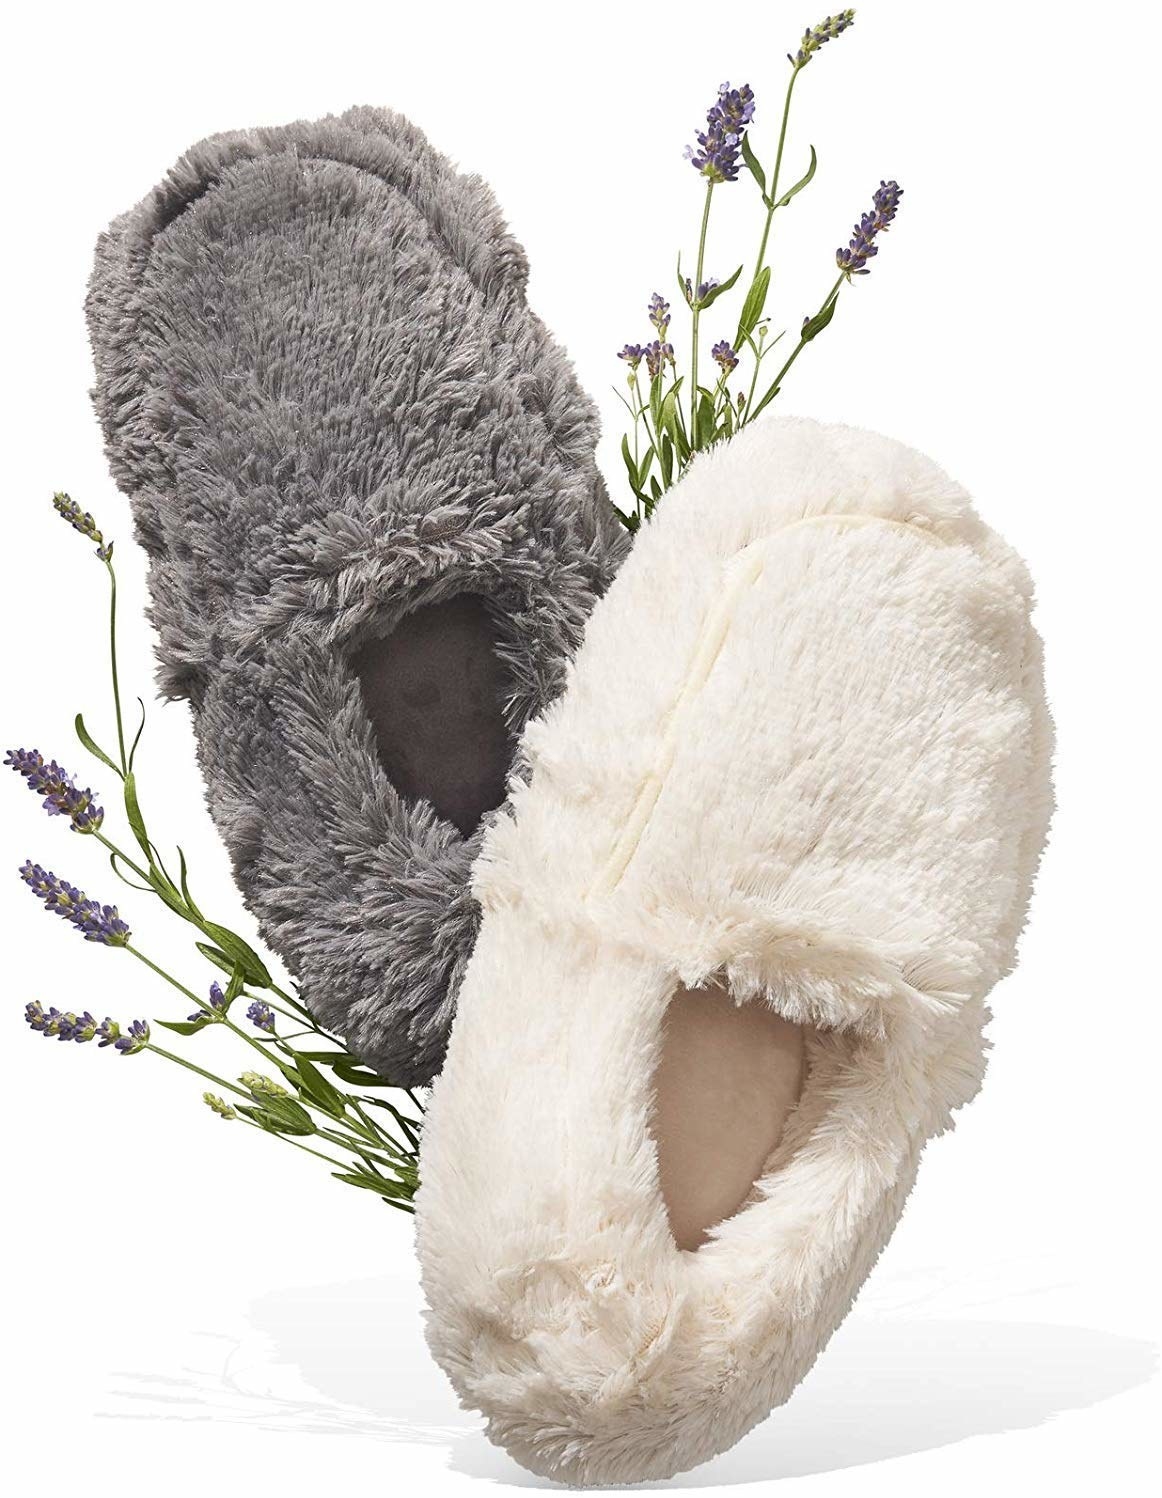 Two fuzzy slippers (one gray, one white) next to some sprigs of lavender